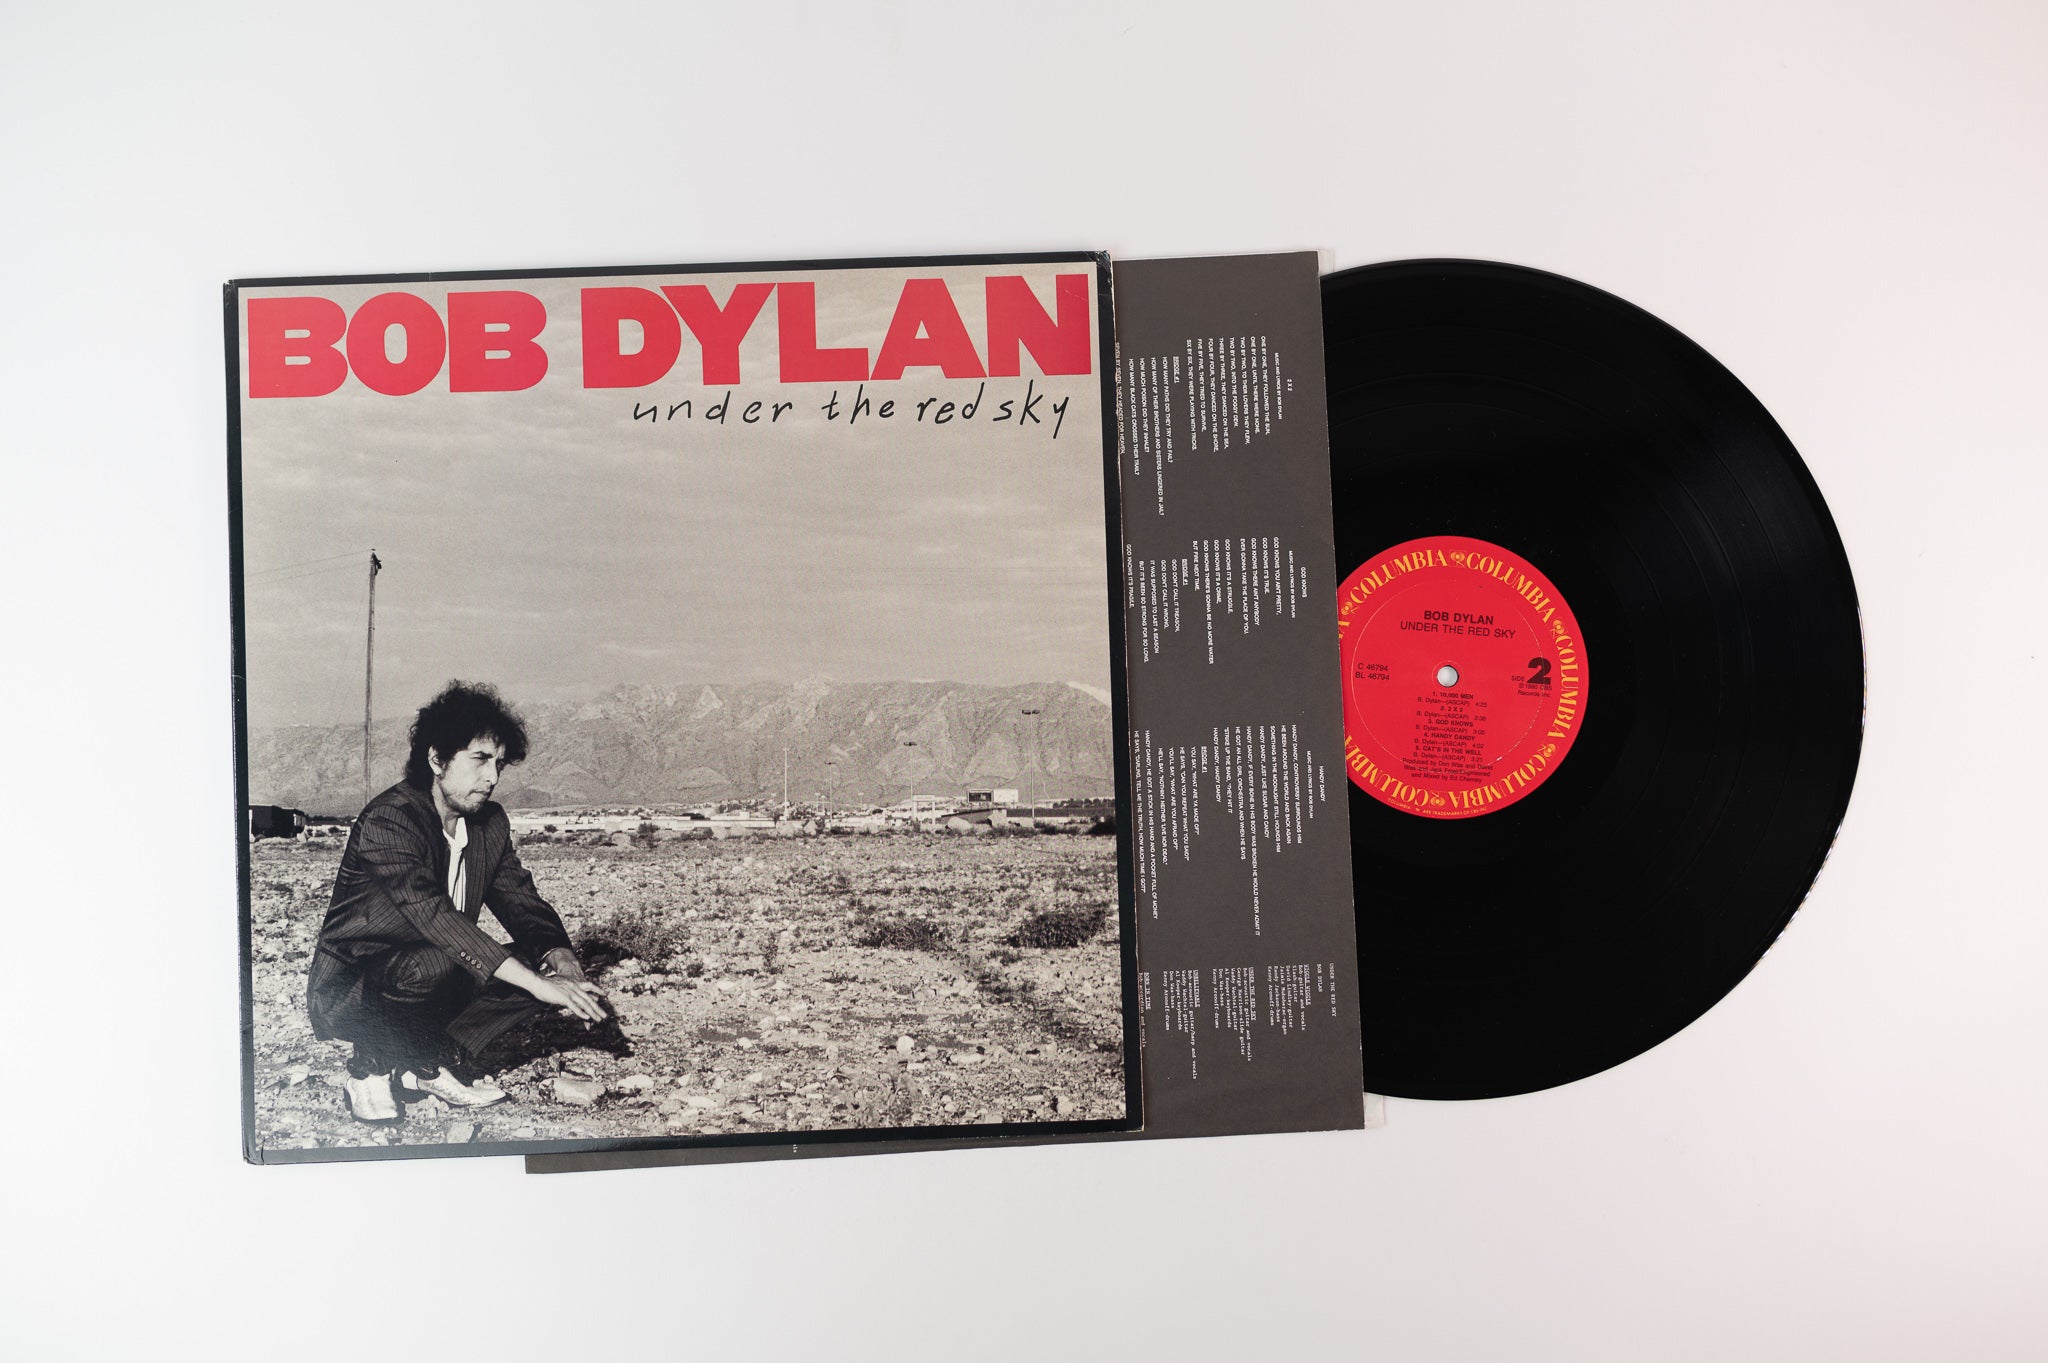 Bob Dylan - Under The Red Sky on Columbia